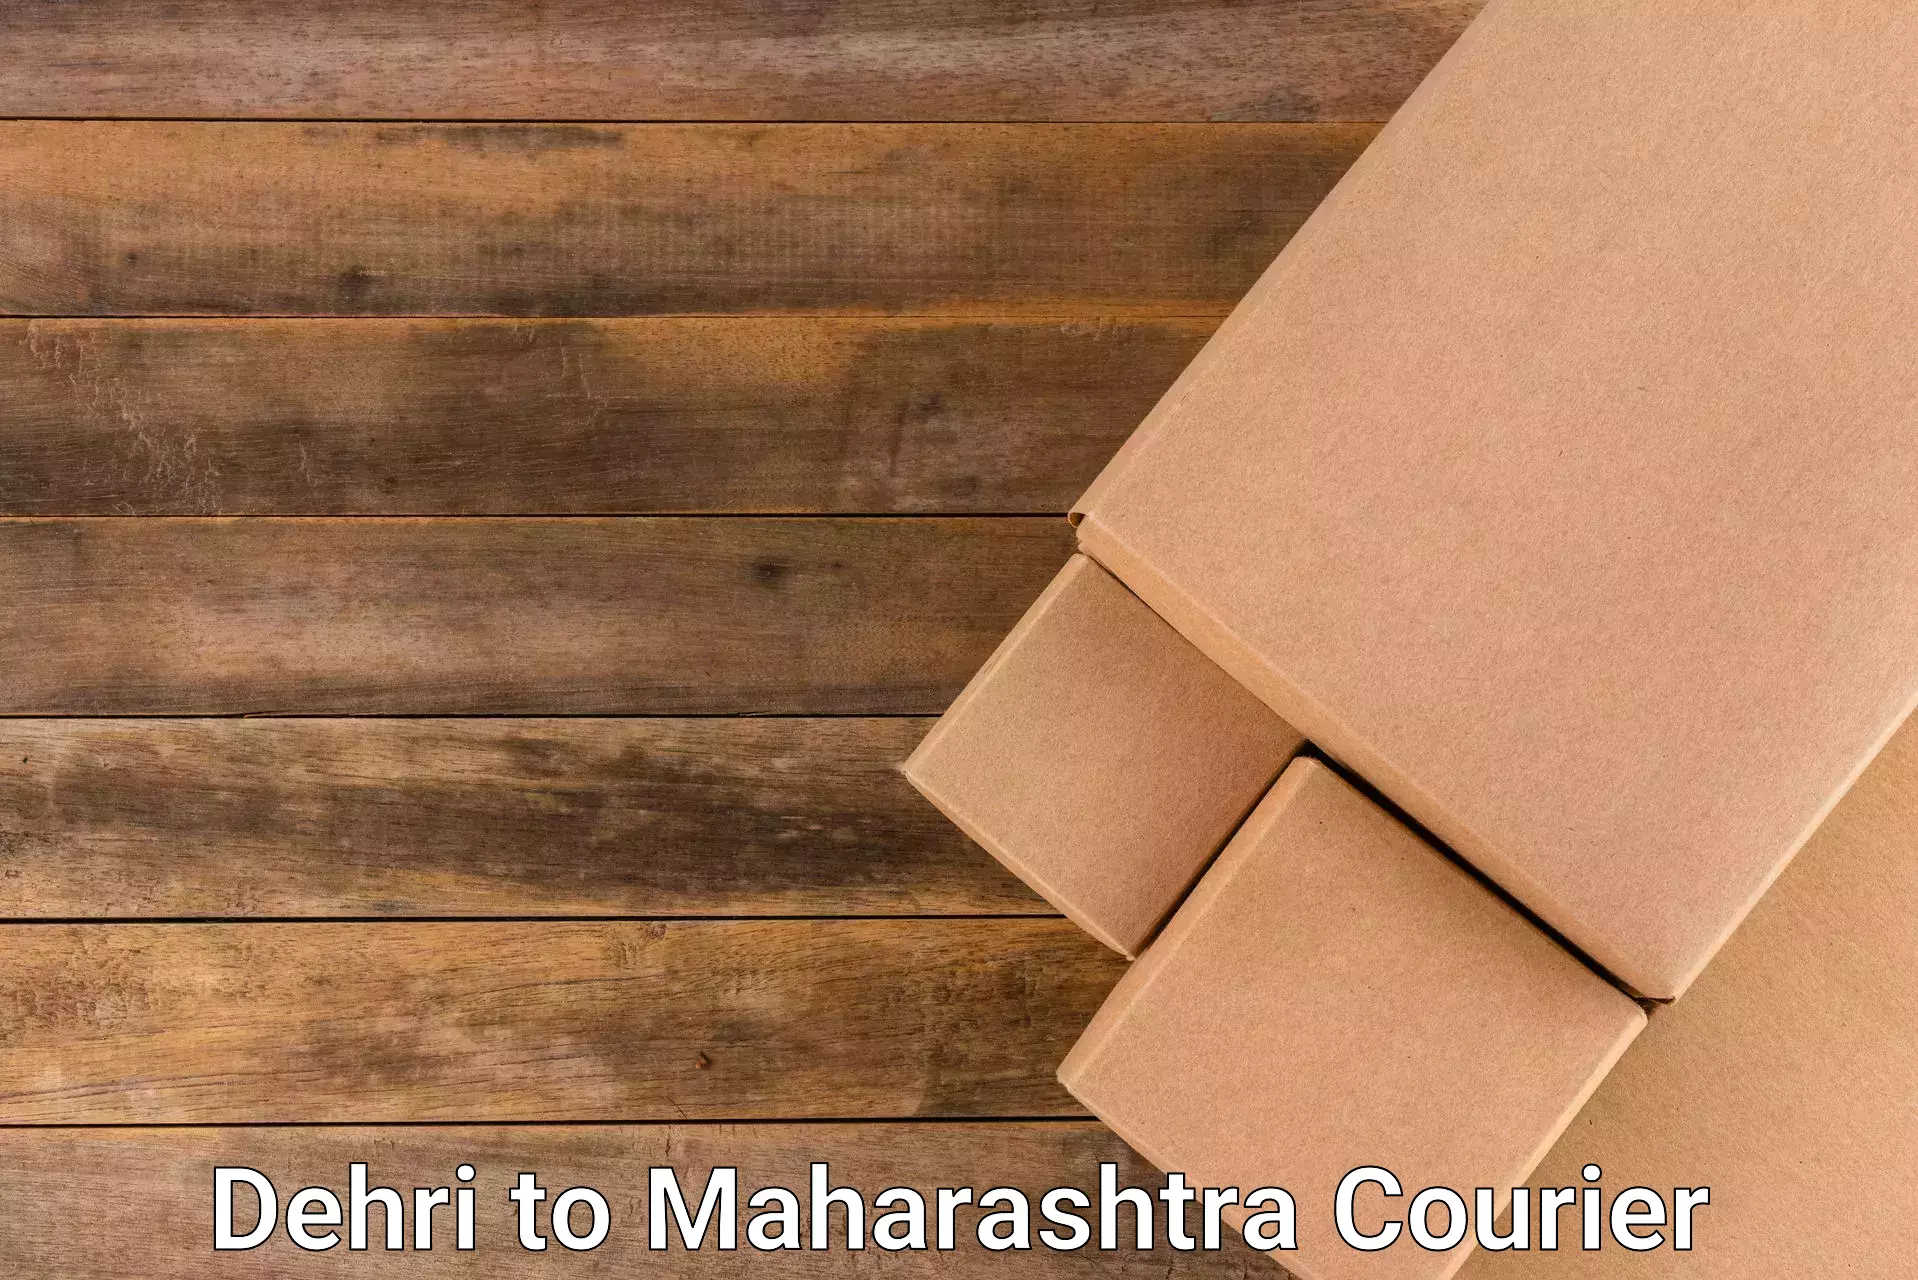 Tech-enabled shipping in Dehri to Maharashtra